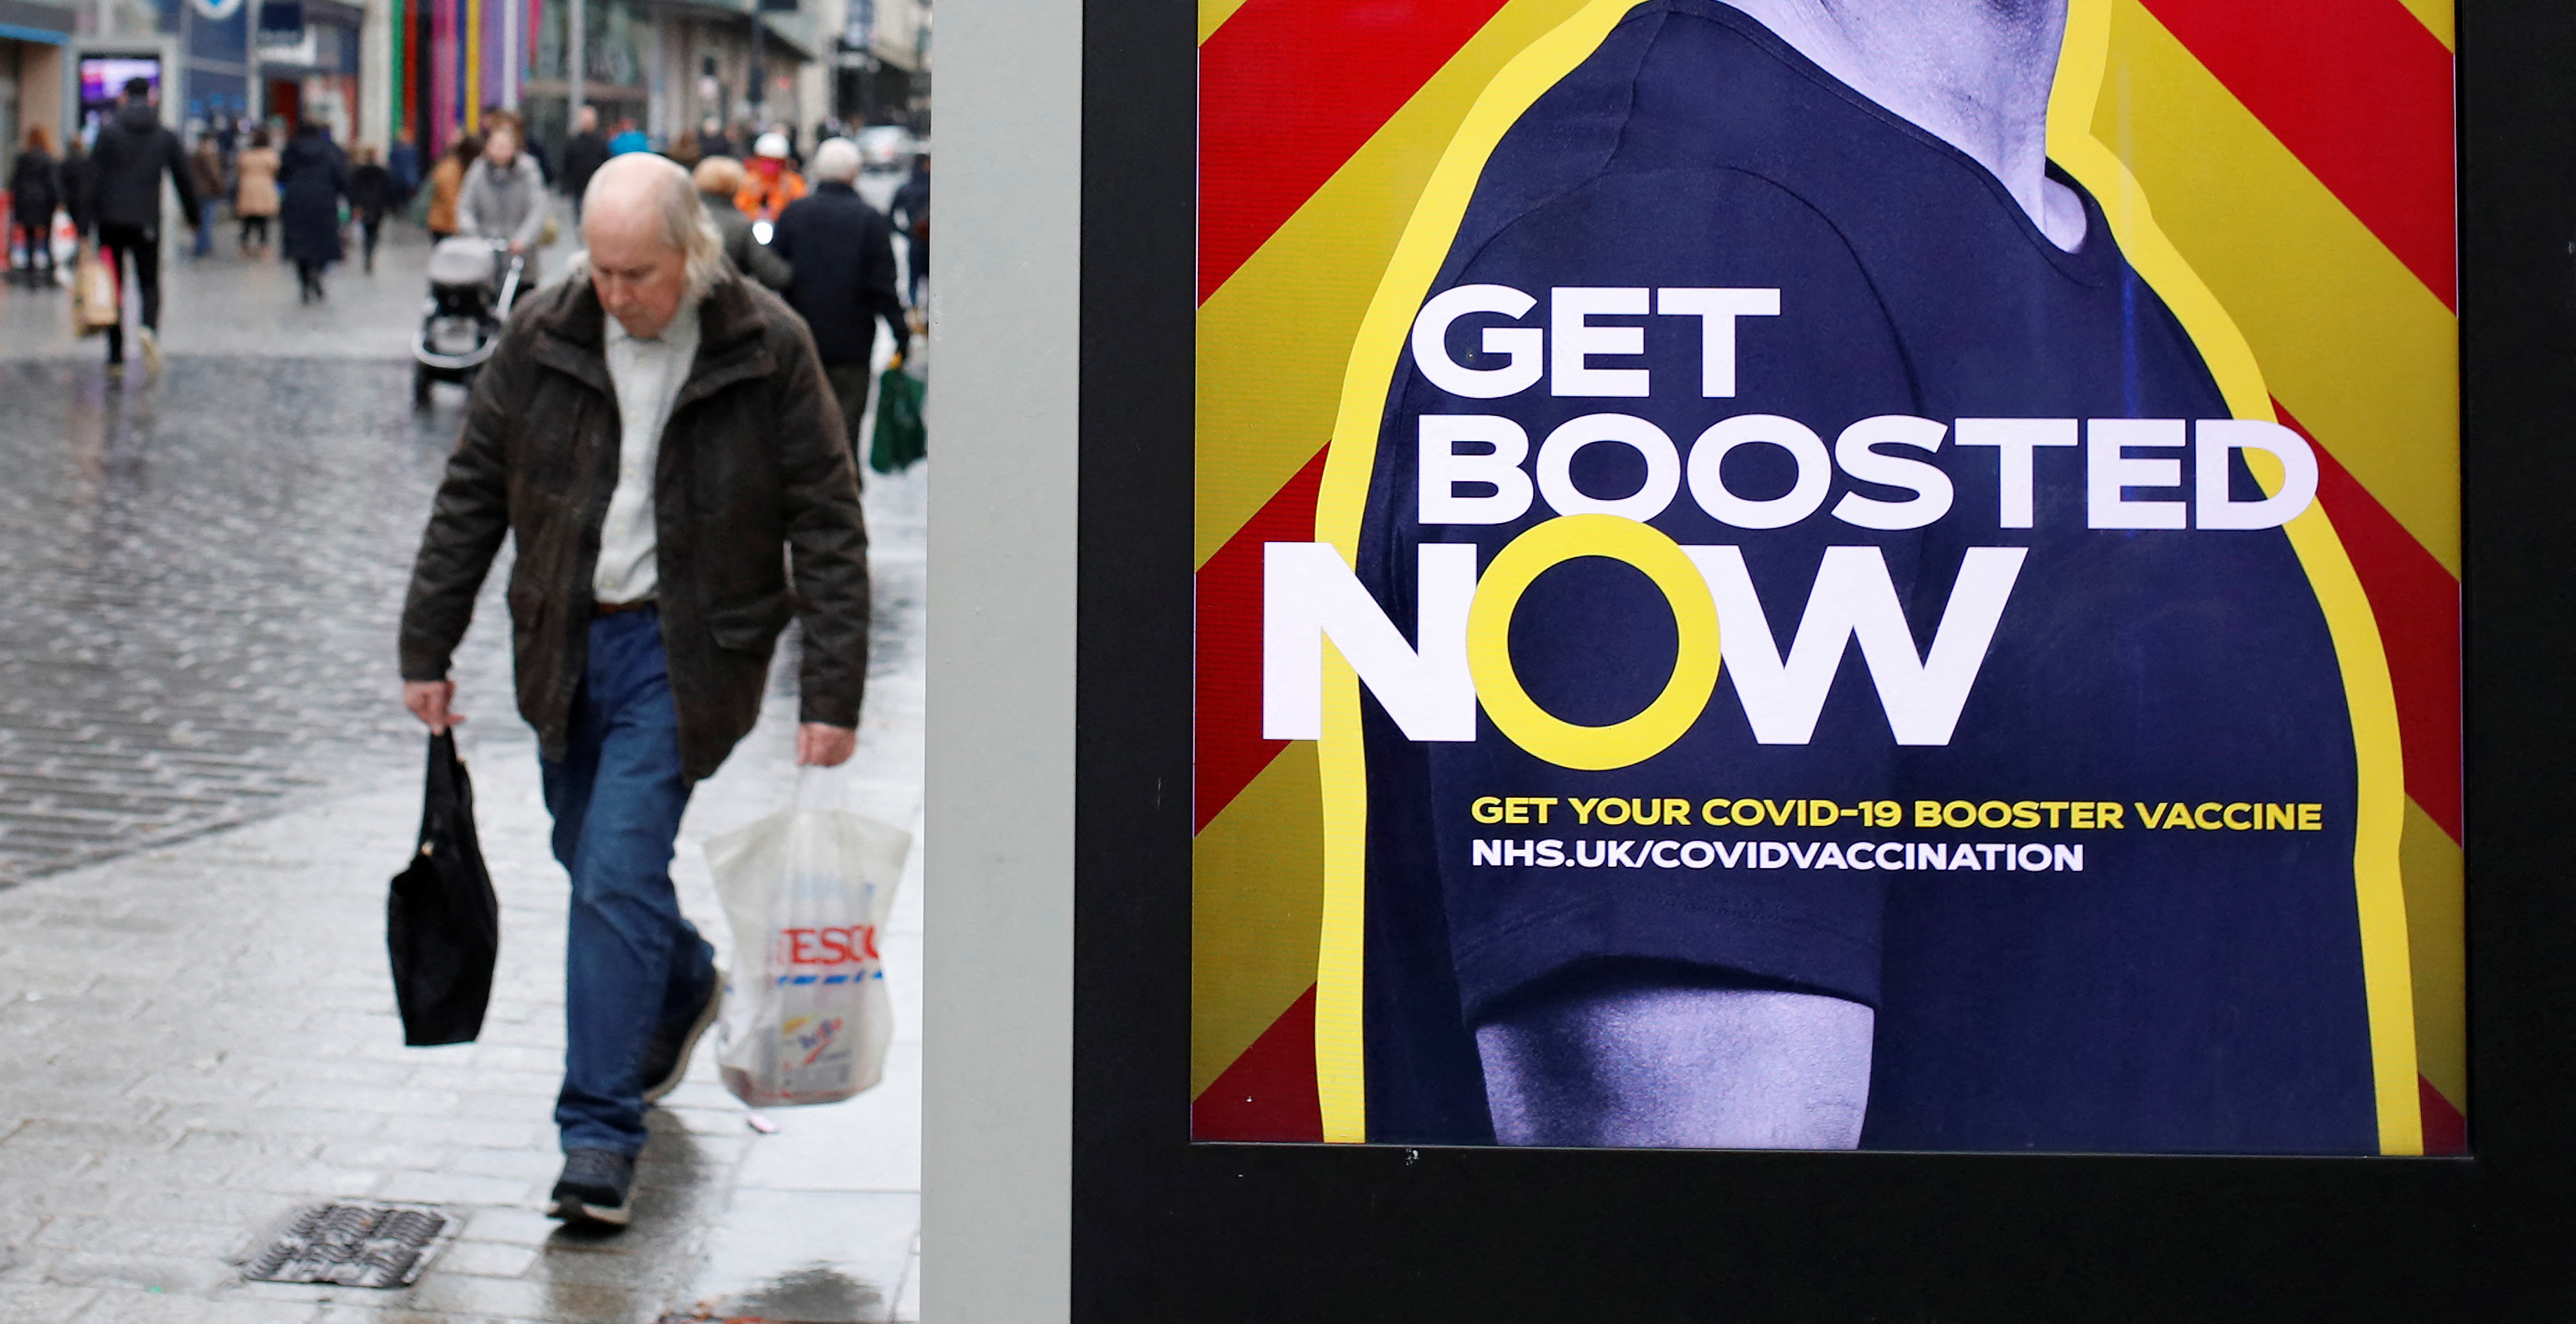 A man walks past an advertising board encouraging people to get their booster vaccination, amid the coronavirus disease (COVID-19) outbreak in Liverpool, Britain, December 29, 2021. REUTERS/Phil Noble